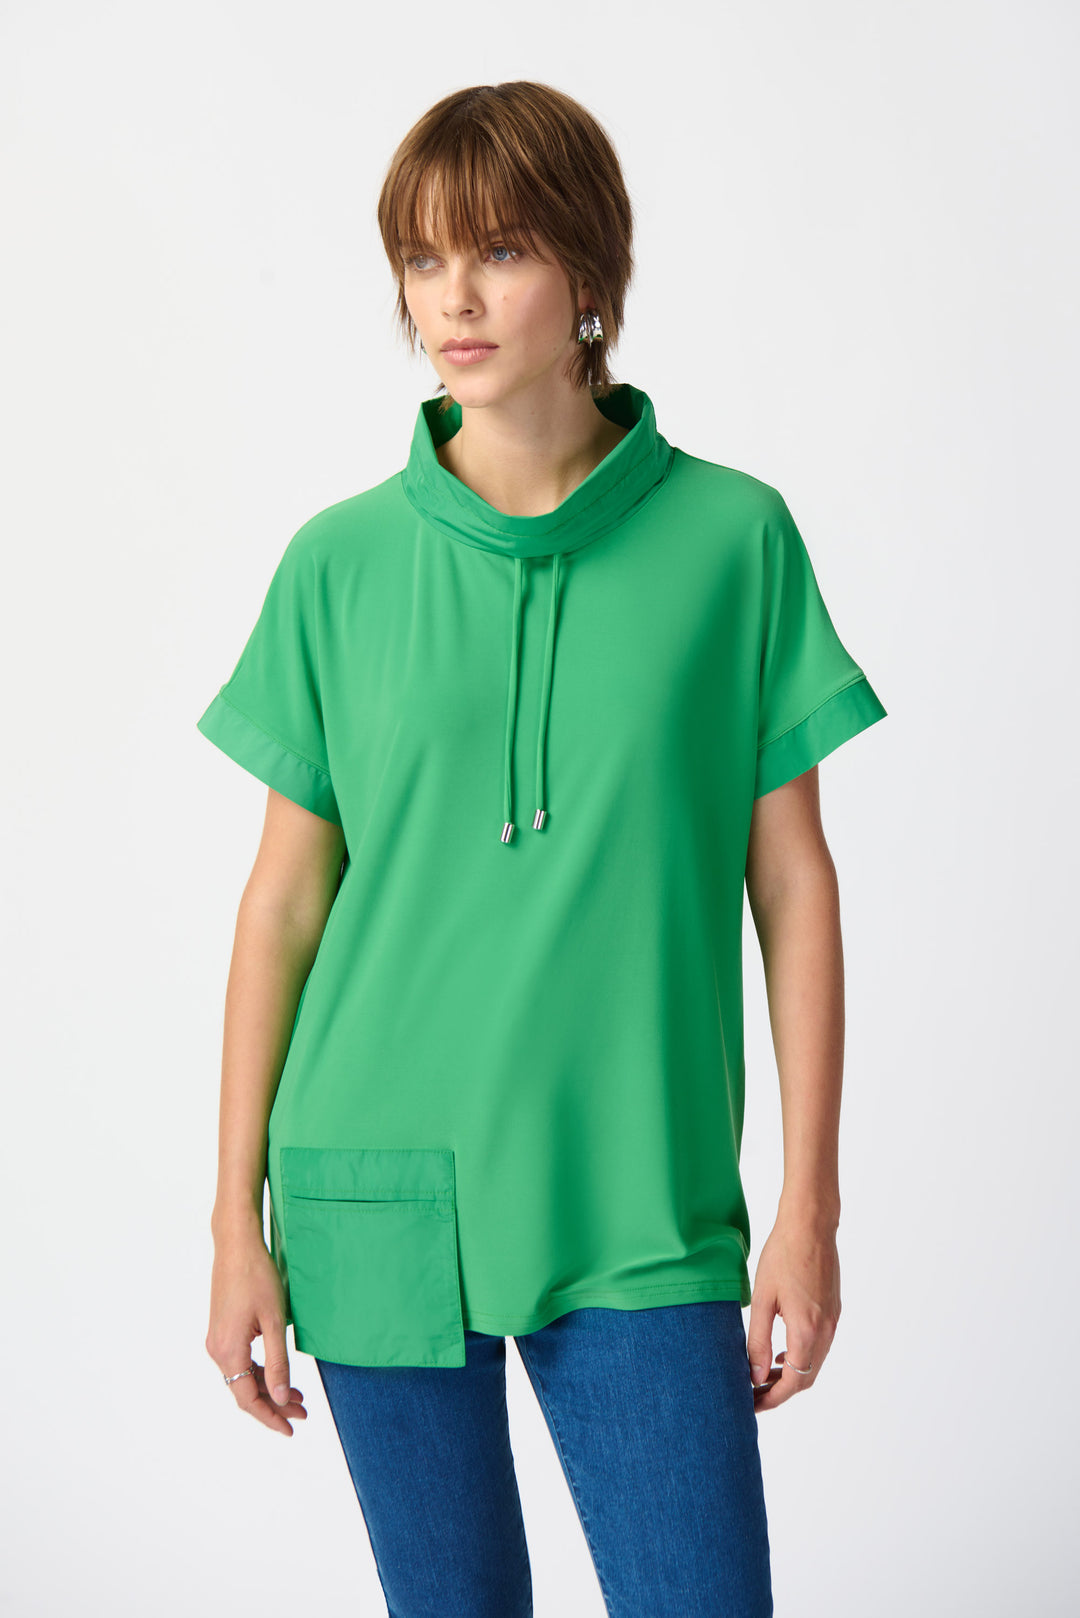 Enjoy a sleek matte look while staying comfortable and relaxed in this lightweight top with short sleeves and a drawstring collar.